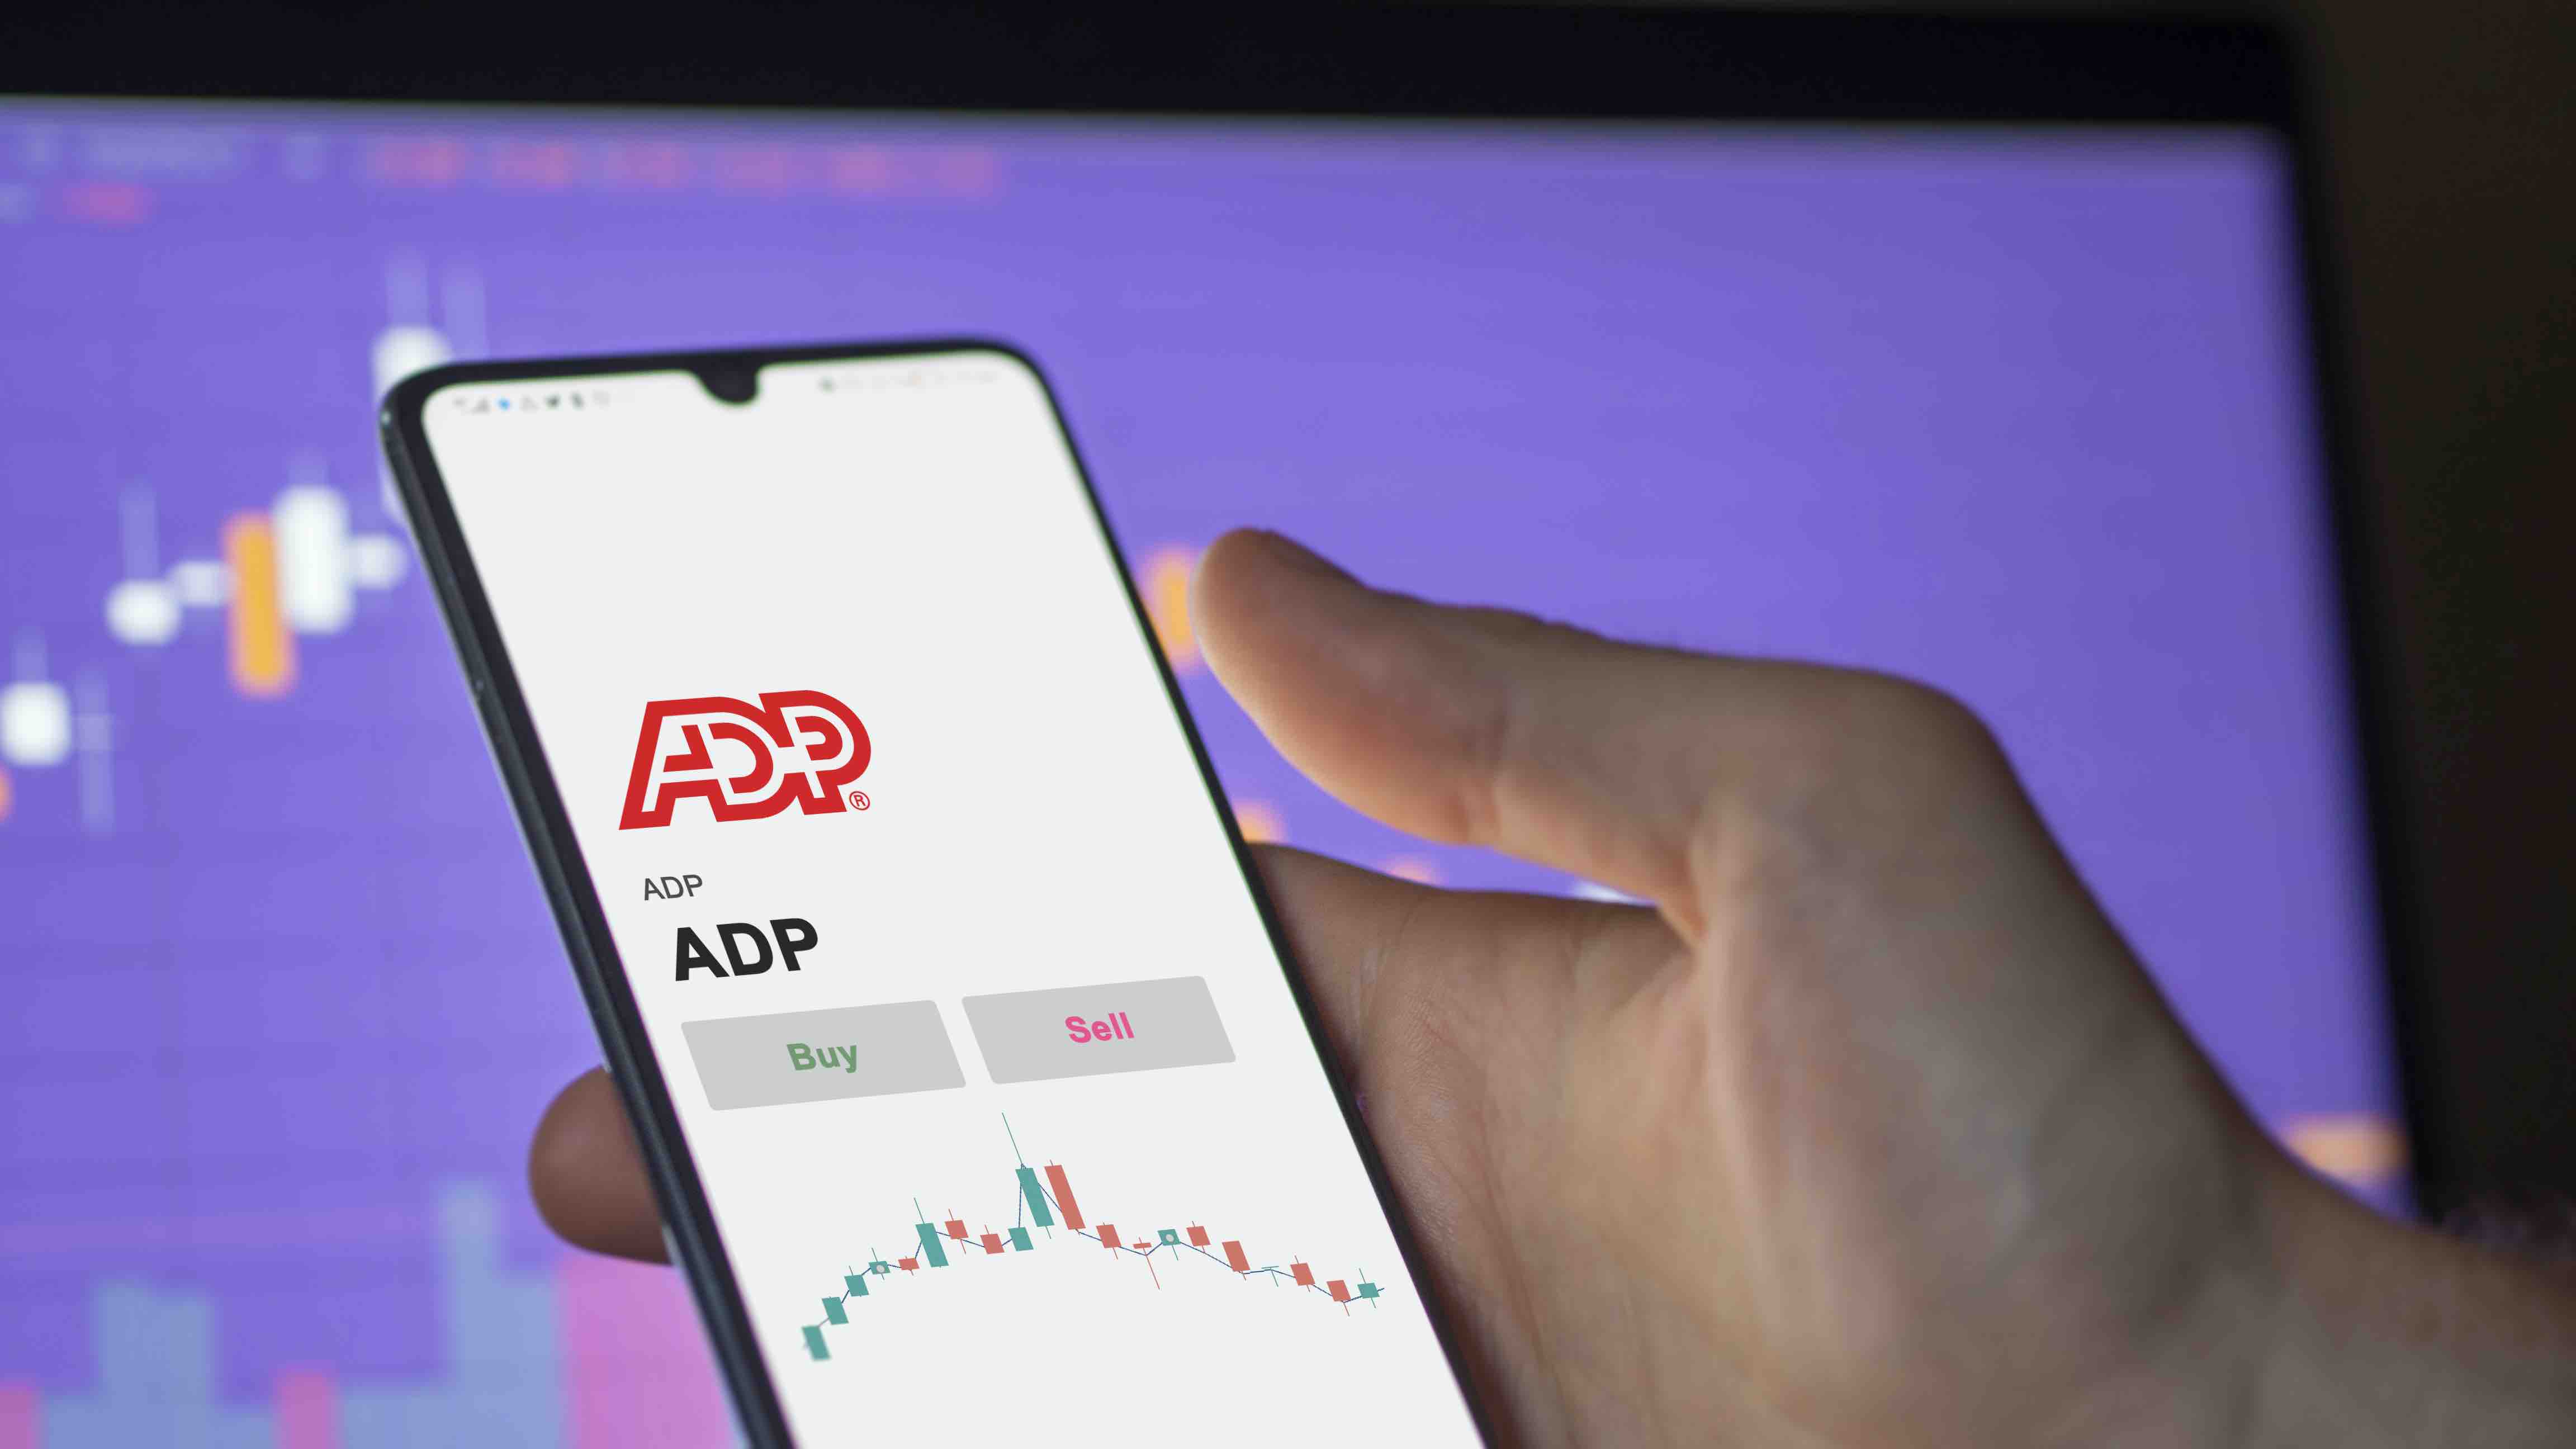 15 Fast Facts About ADP Behind the Scenes of Operations